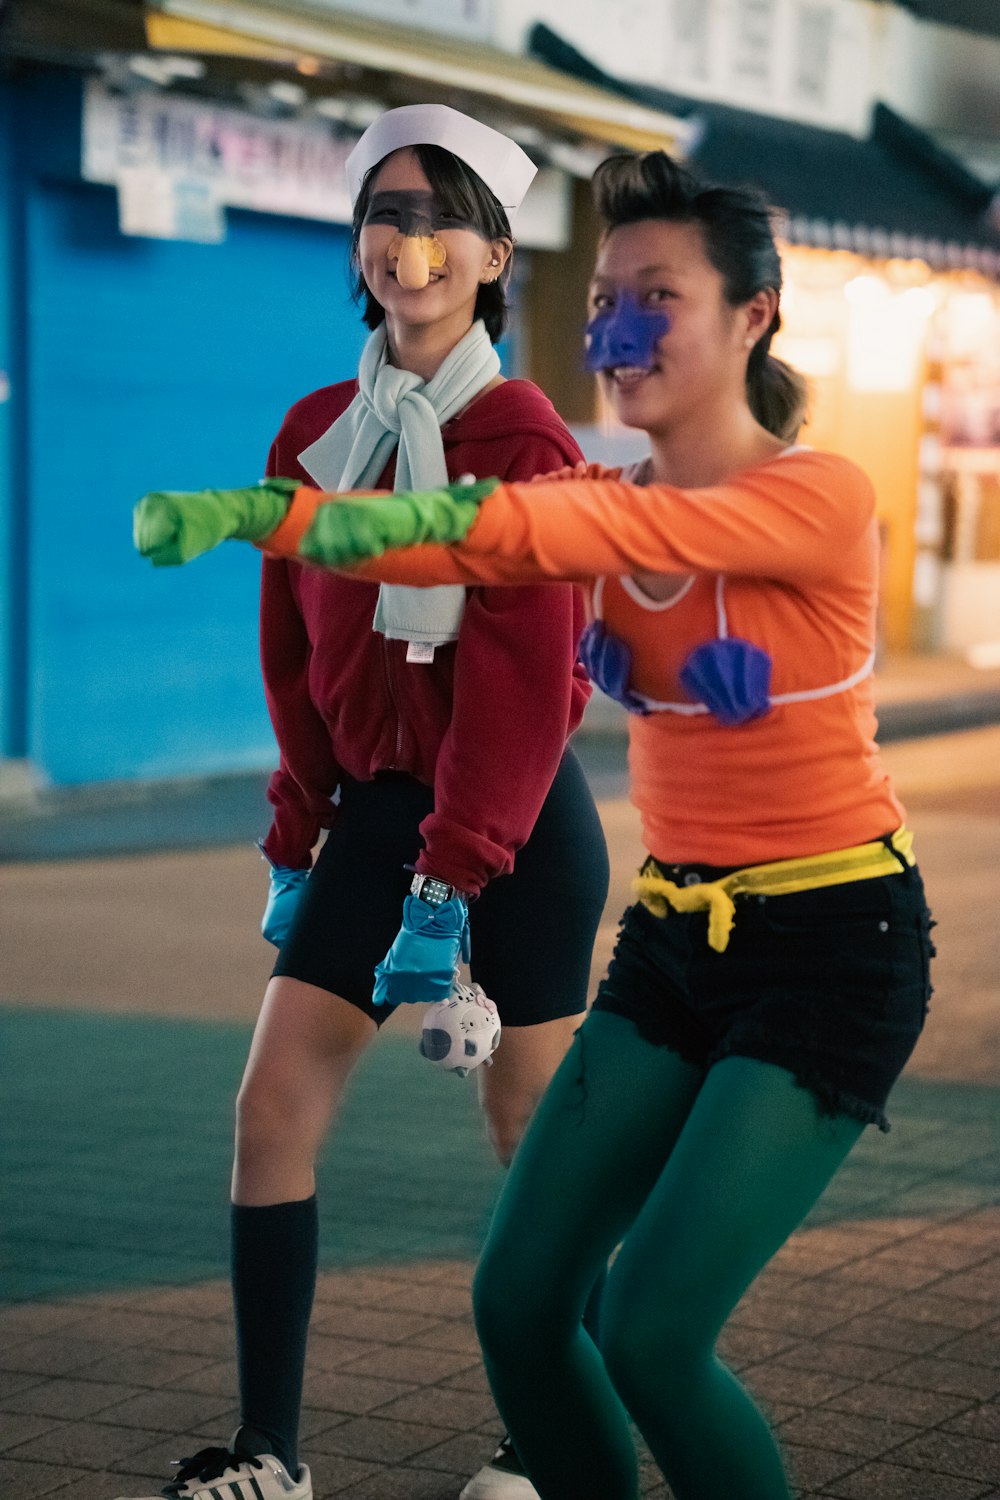 two women in costumes are playing with a toy